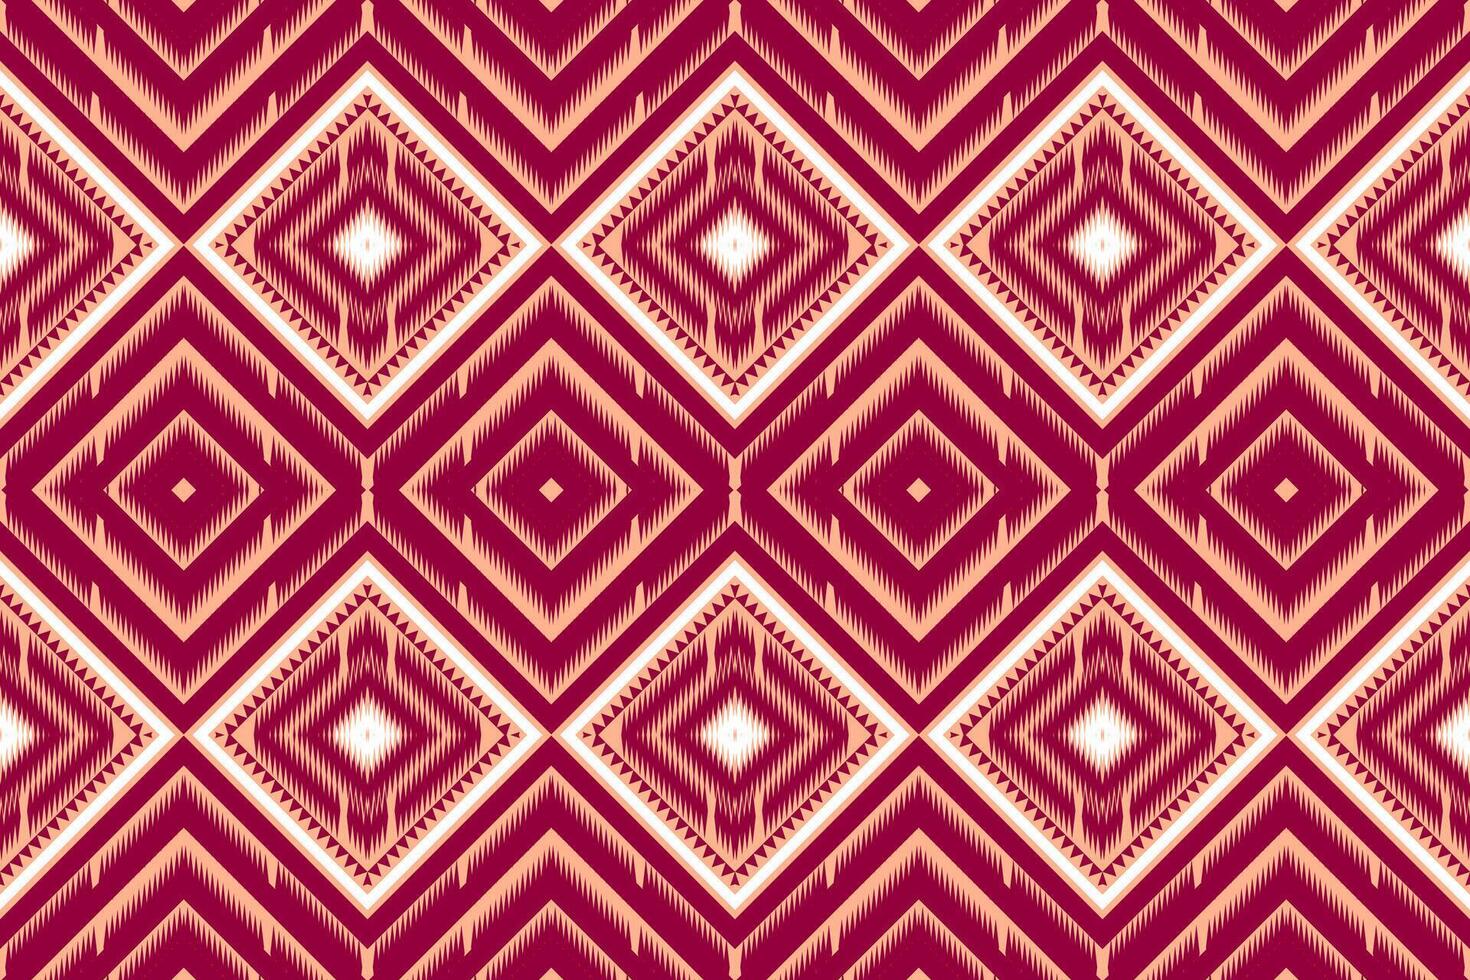 Aztec tribal geometric vector background in black red yellow white Seamless stripe pattern. Traditional ornament ethnic style. Design for textile, fabric, clothing, curtain, rug, ornament, wrapping.